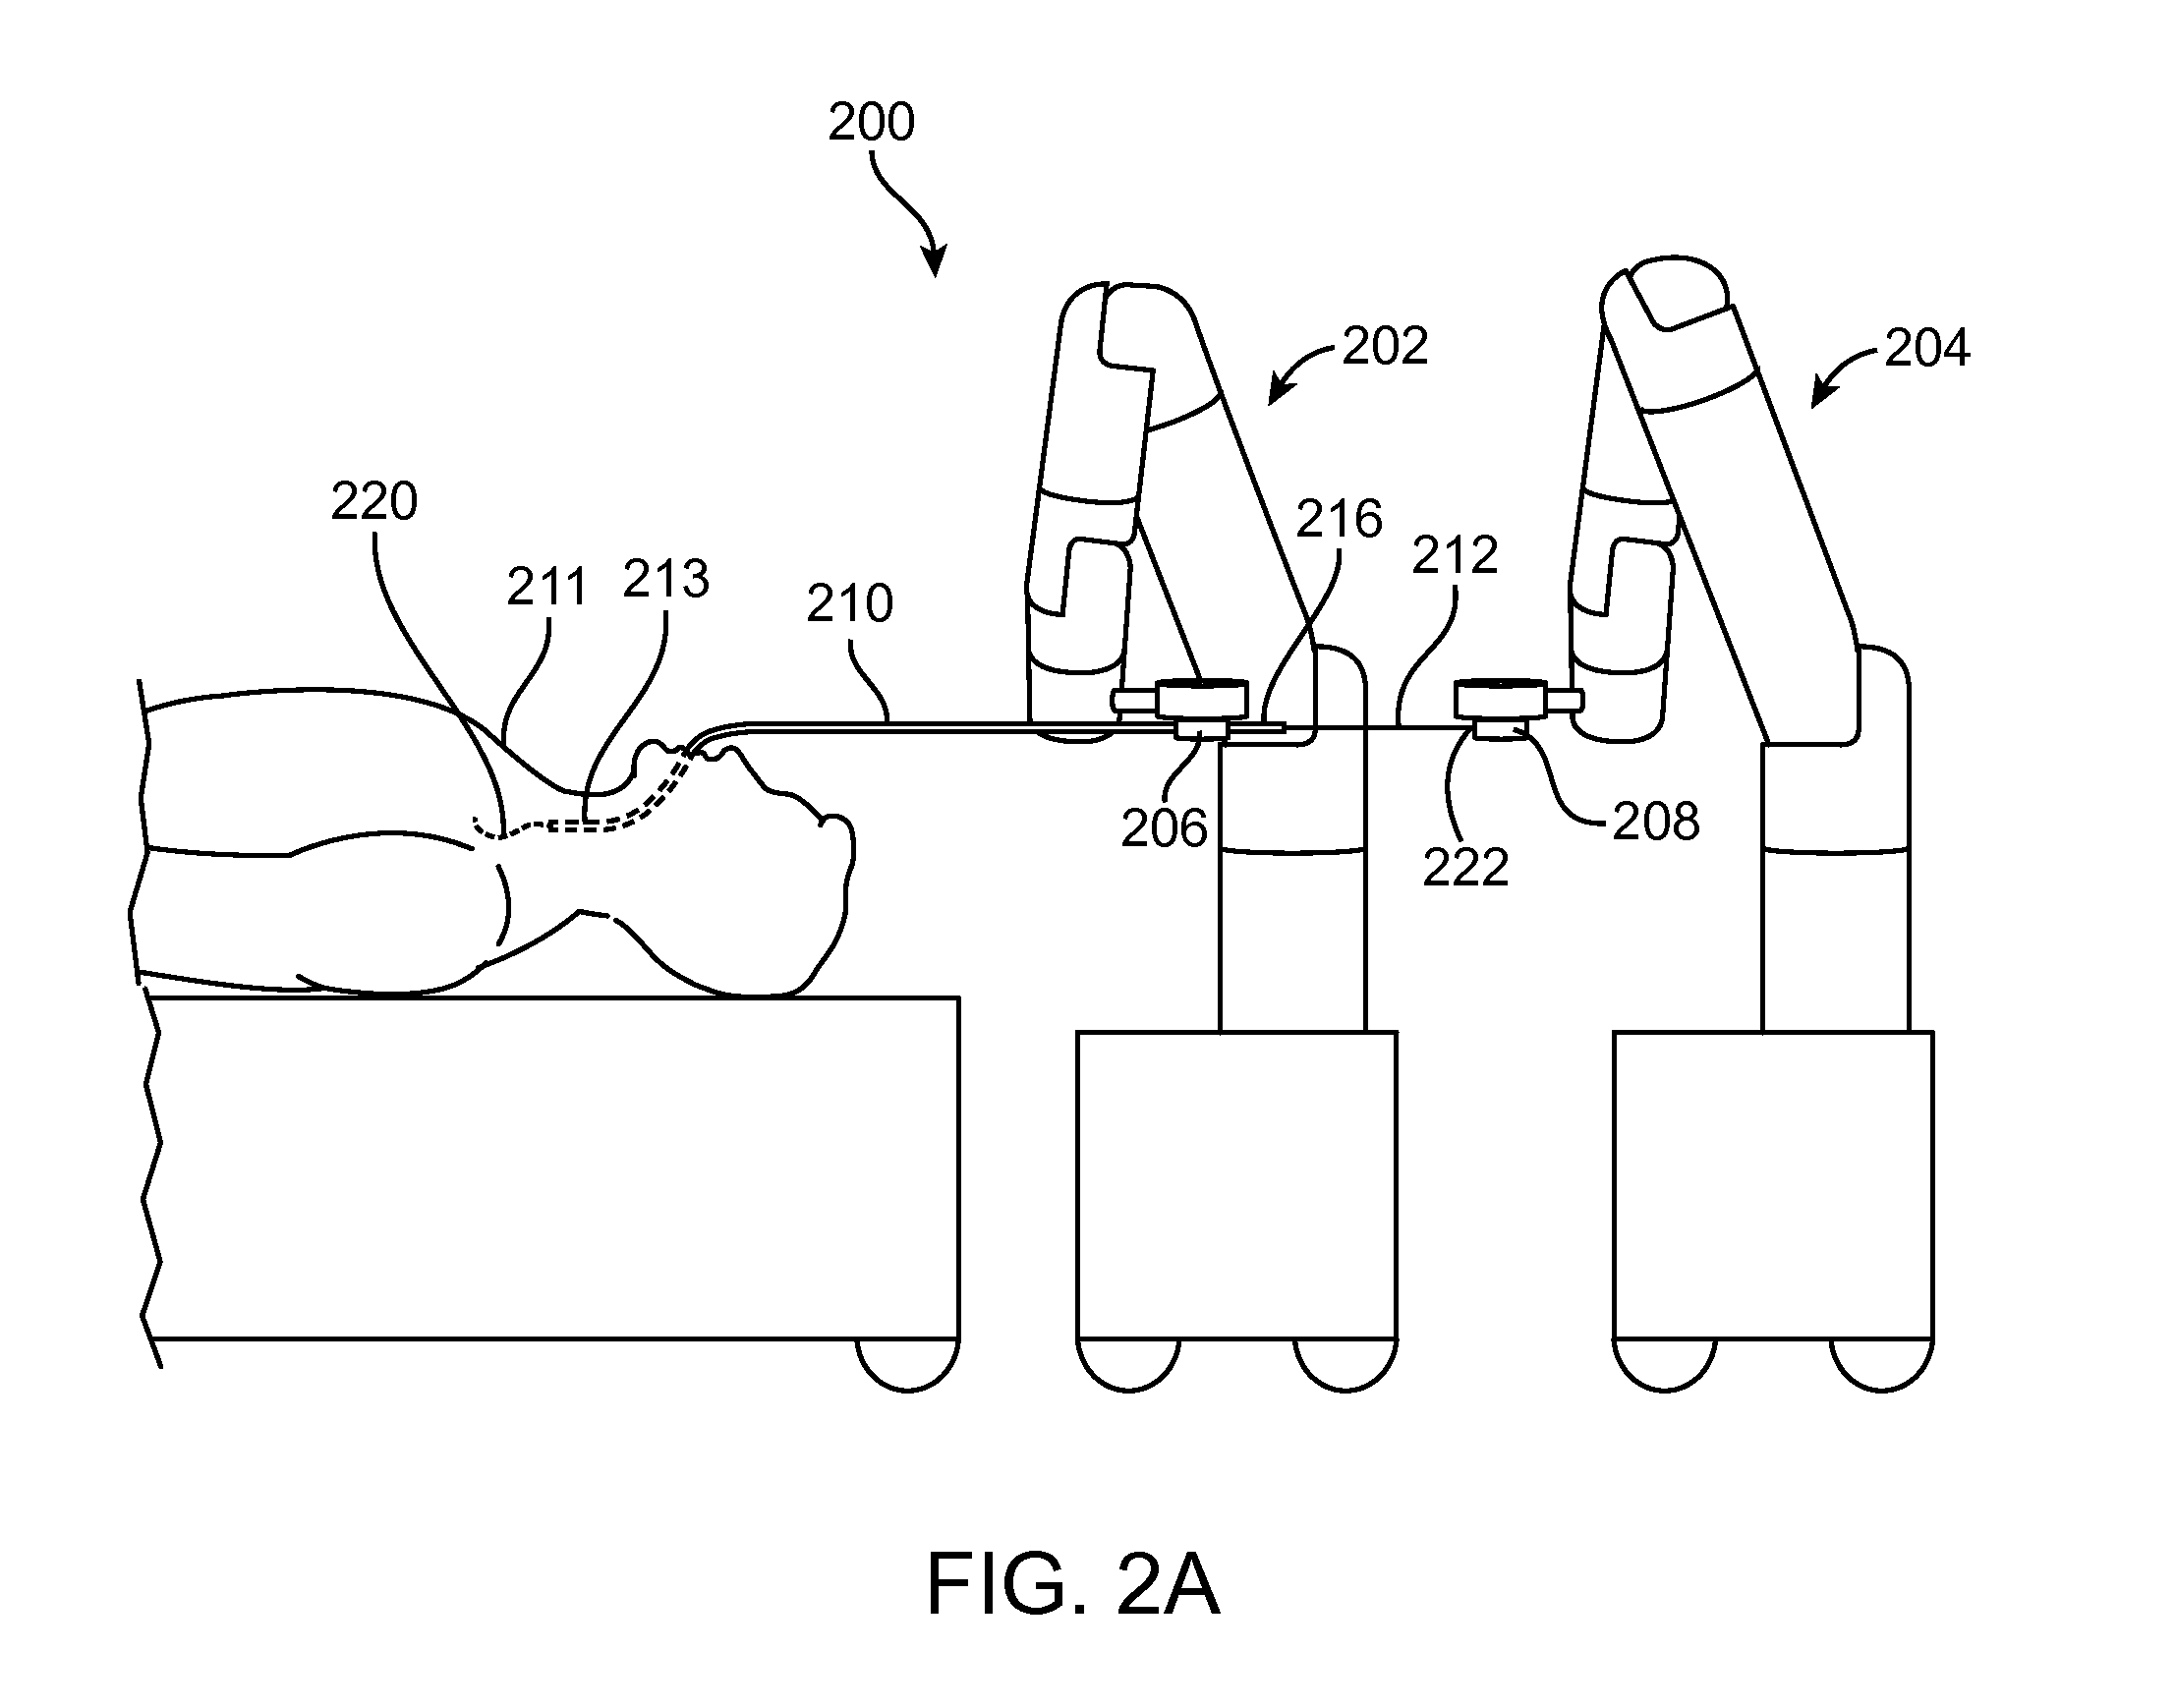 Tool and method for using surgical endoscope with spiral lumens